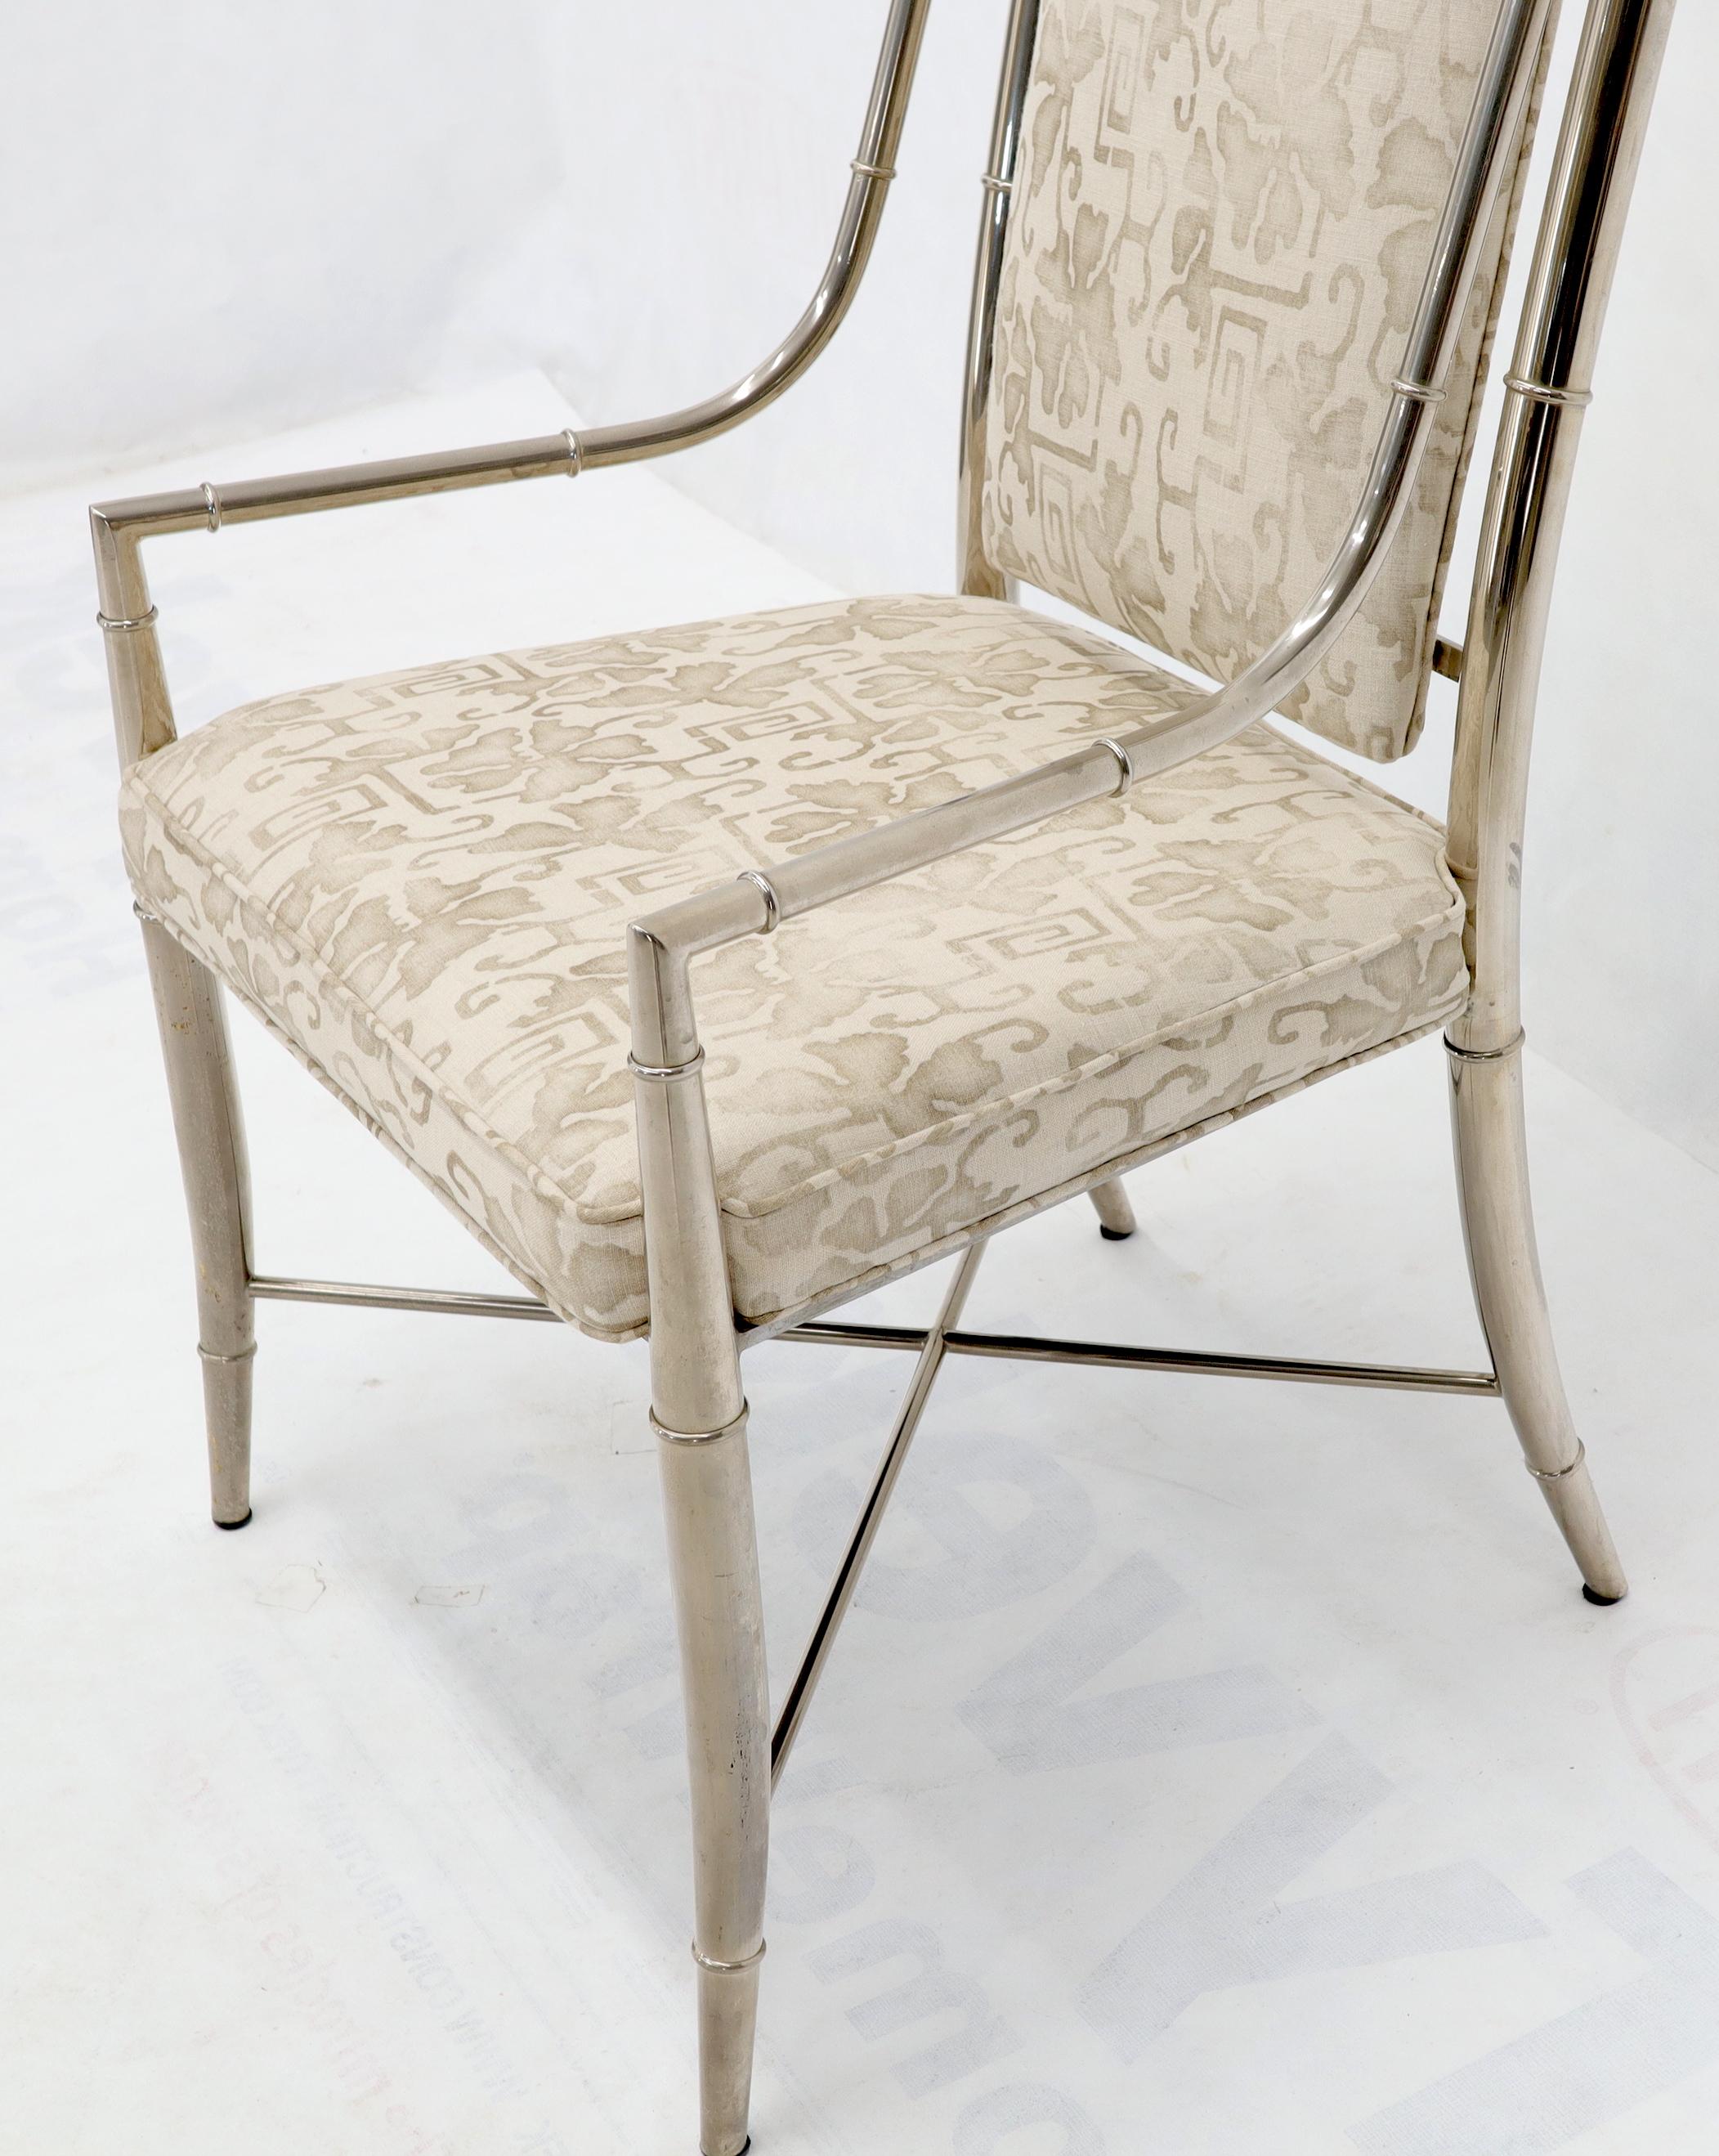 20th Century Imperial Dining Room Chair by Weiman / Warren Lloyd for Mastercraft in Chrome